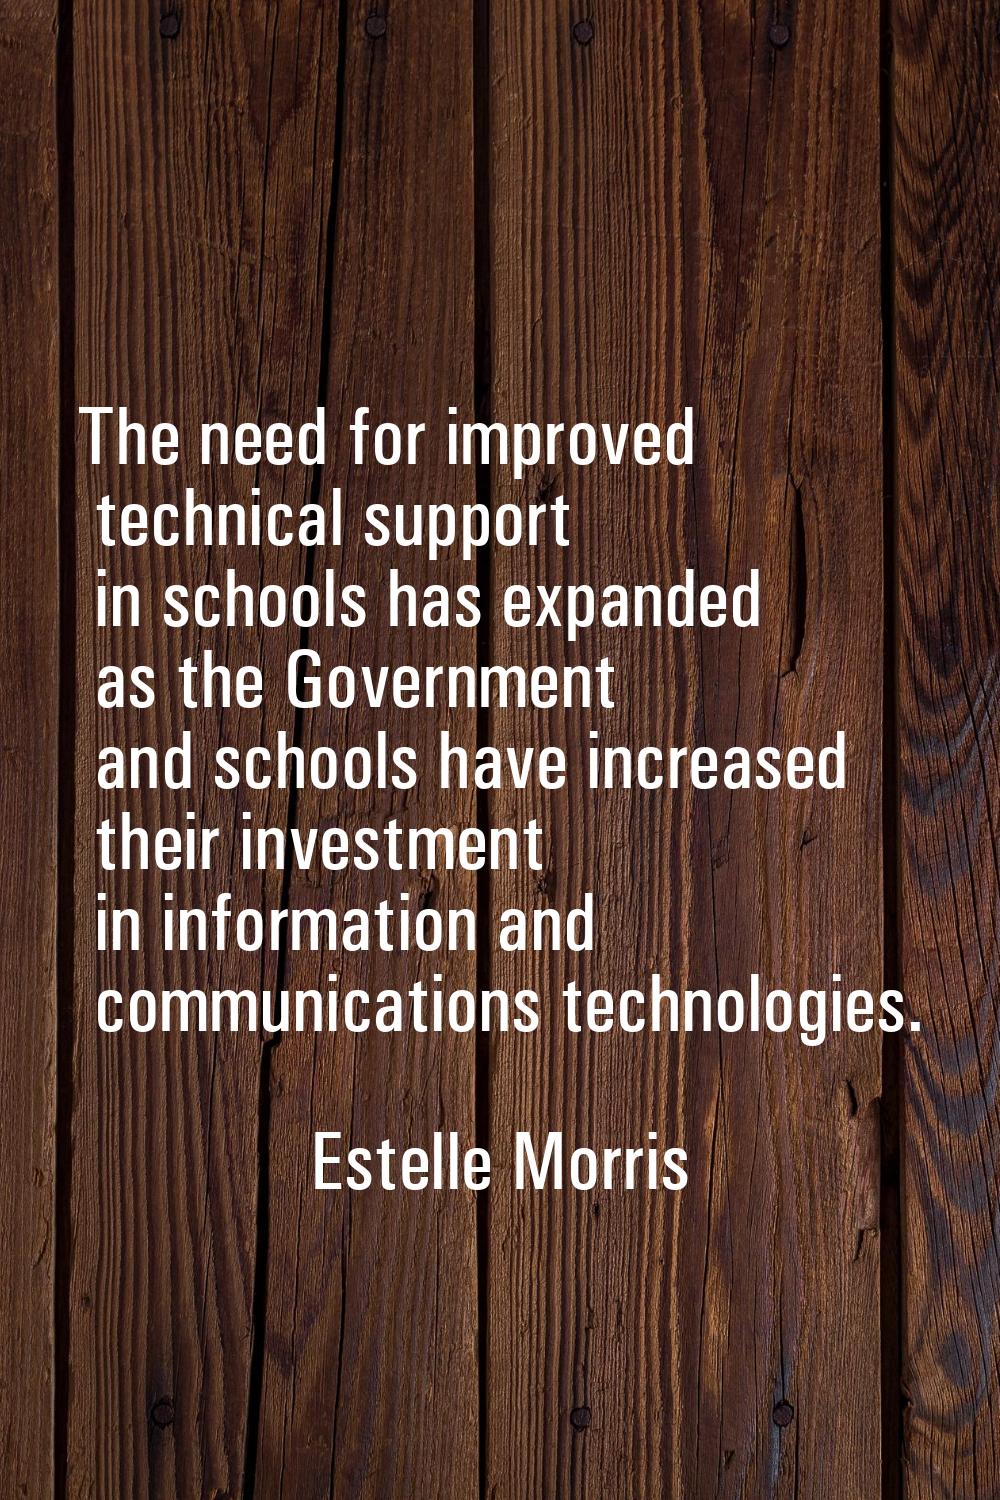 The need for improved technical support in schools has expanded as the Government and schools have 